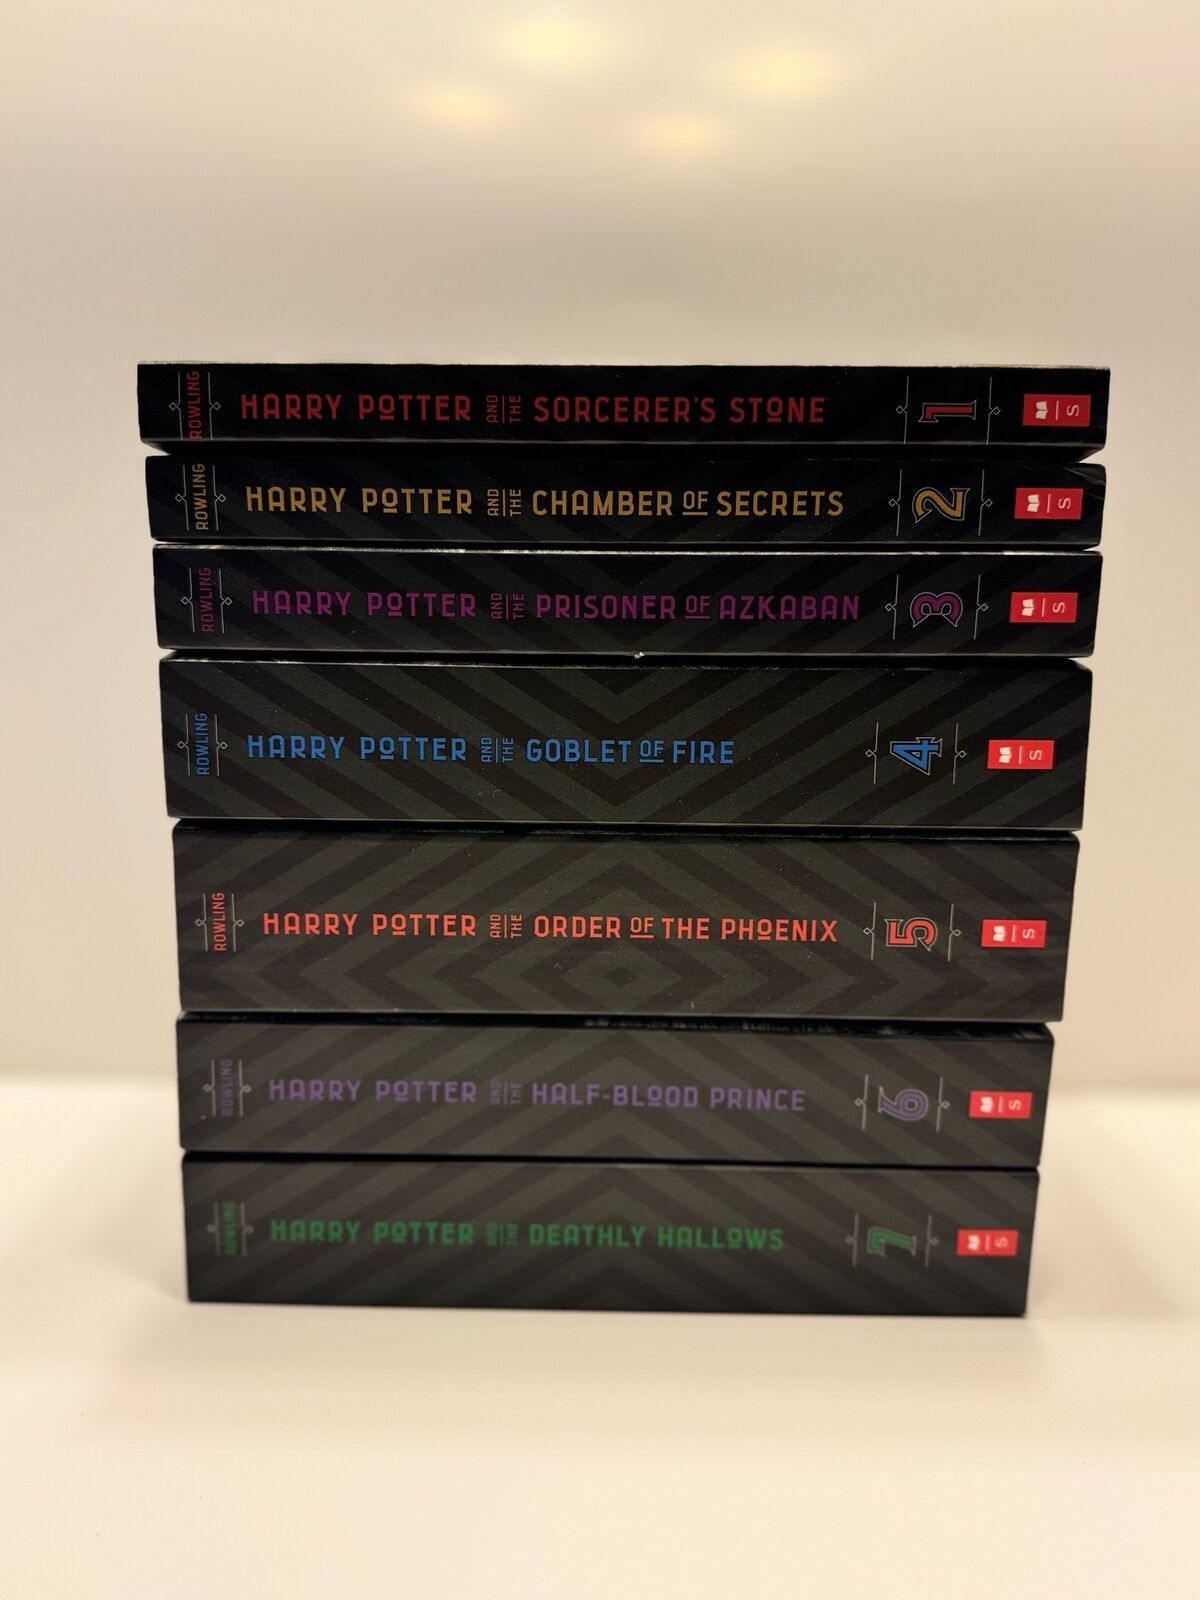 Harry Potter: Books 1-7 A Special Edition Paperback Collection-New